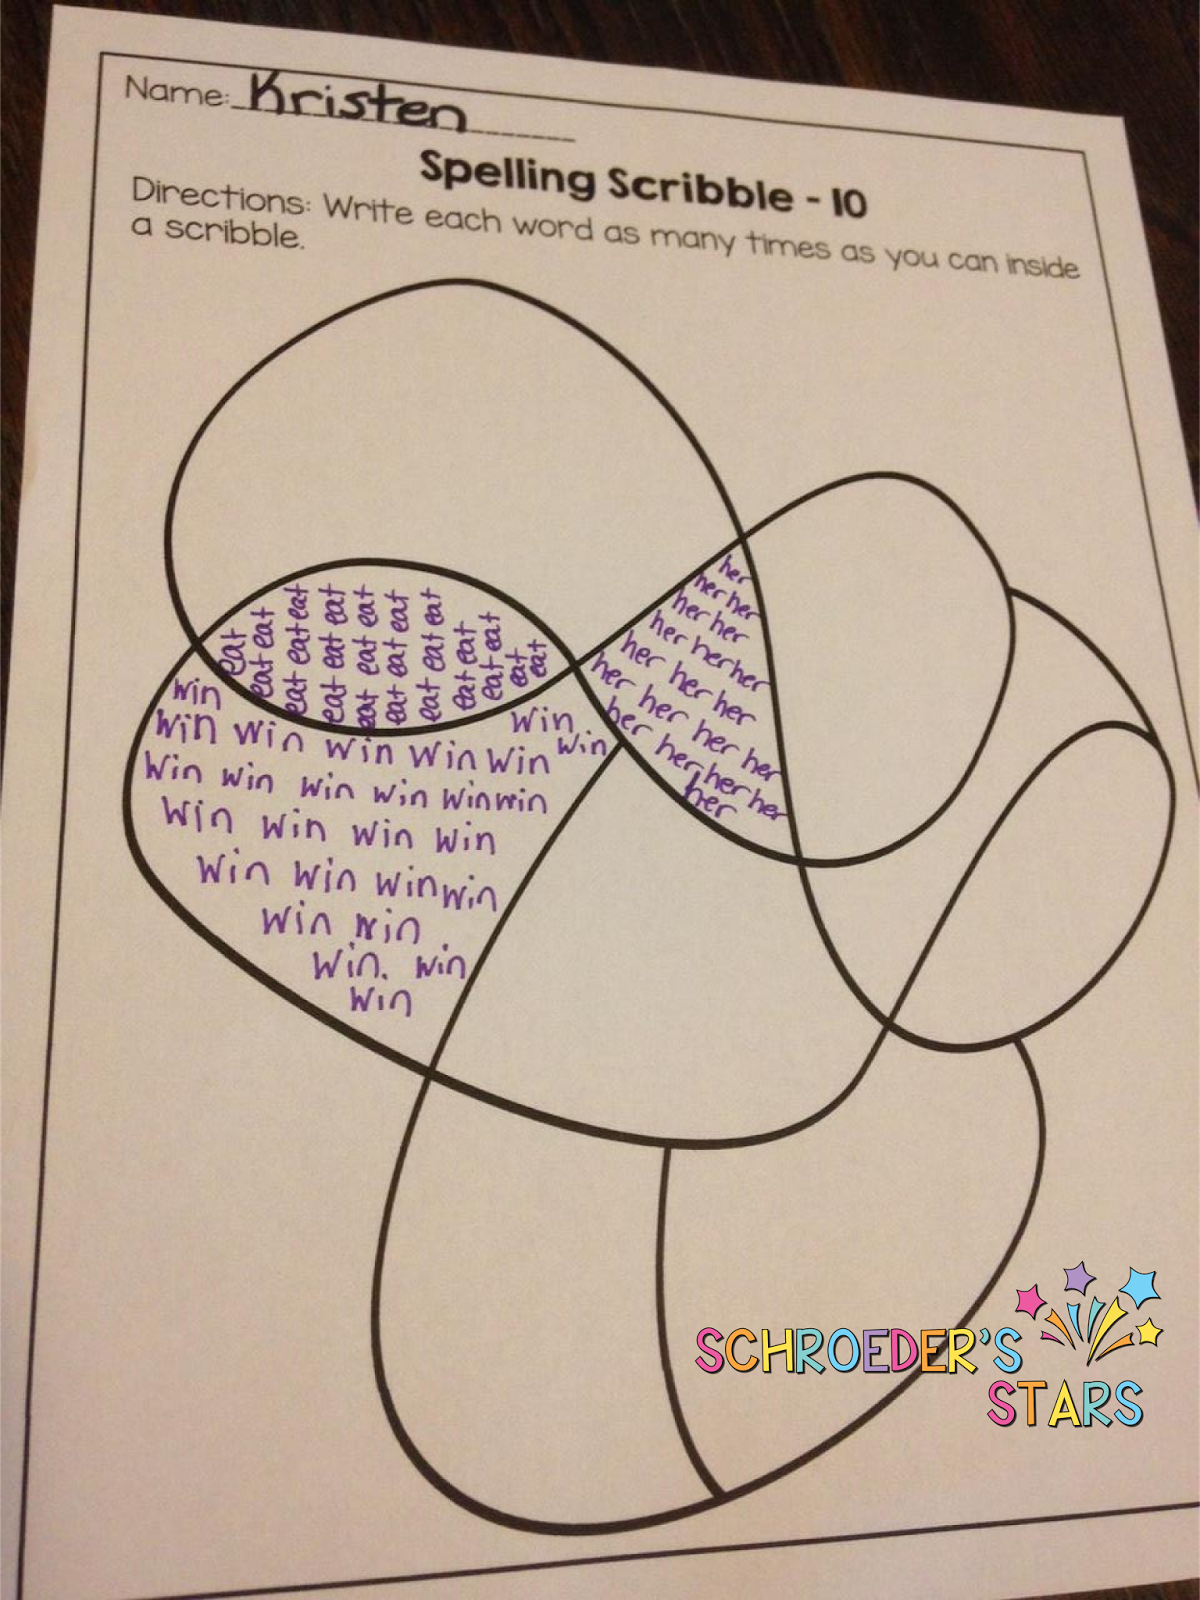 Schroeder's Stars: Spelling on the Go! Fun printables for any spelling